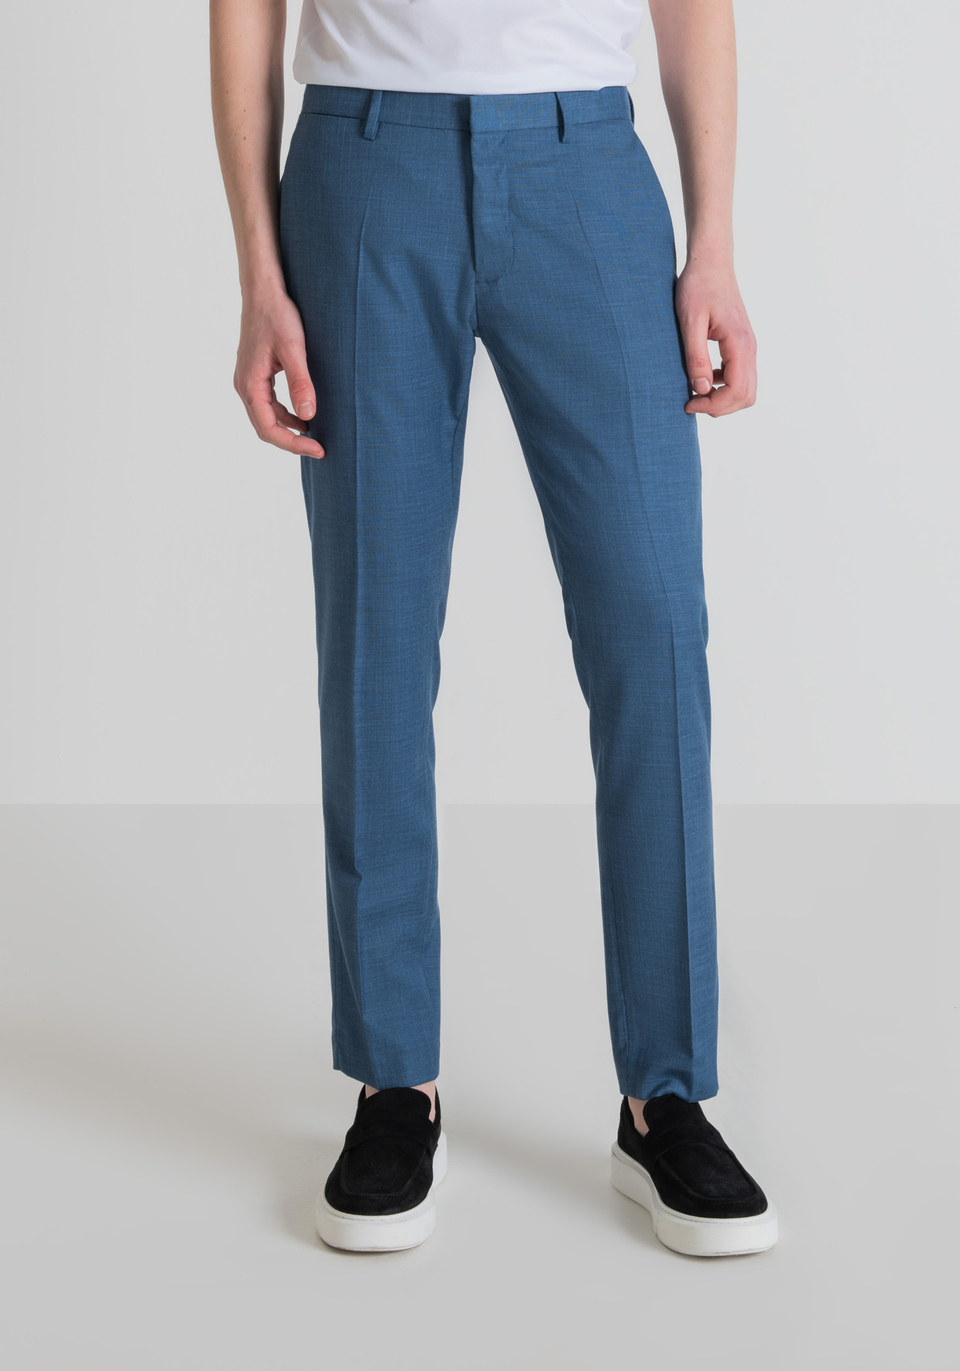 "BONNIE" SLIM-FIT TROUSERS IN STRETCH FABRIC - Antony Morato Online Shop